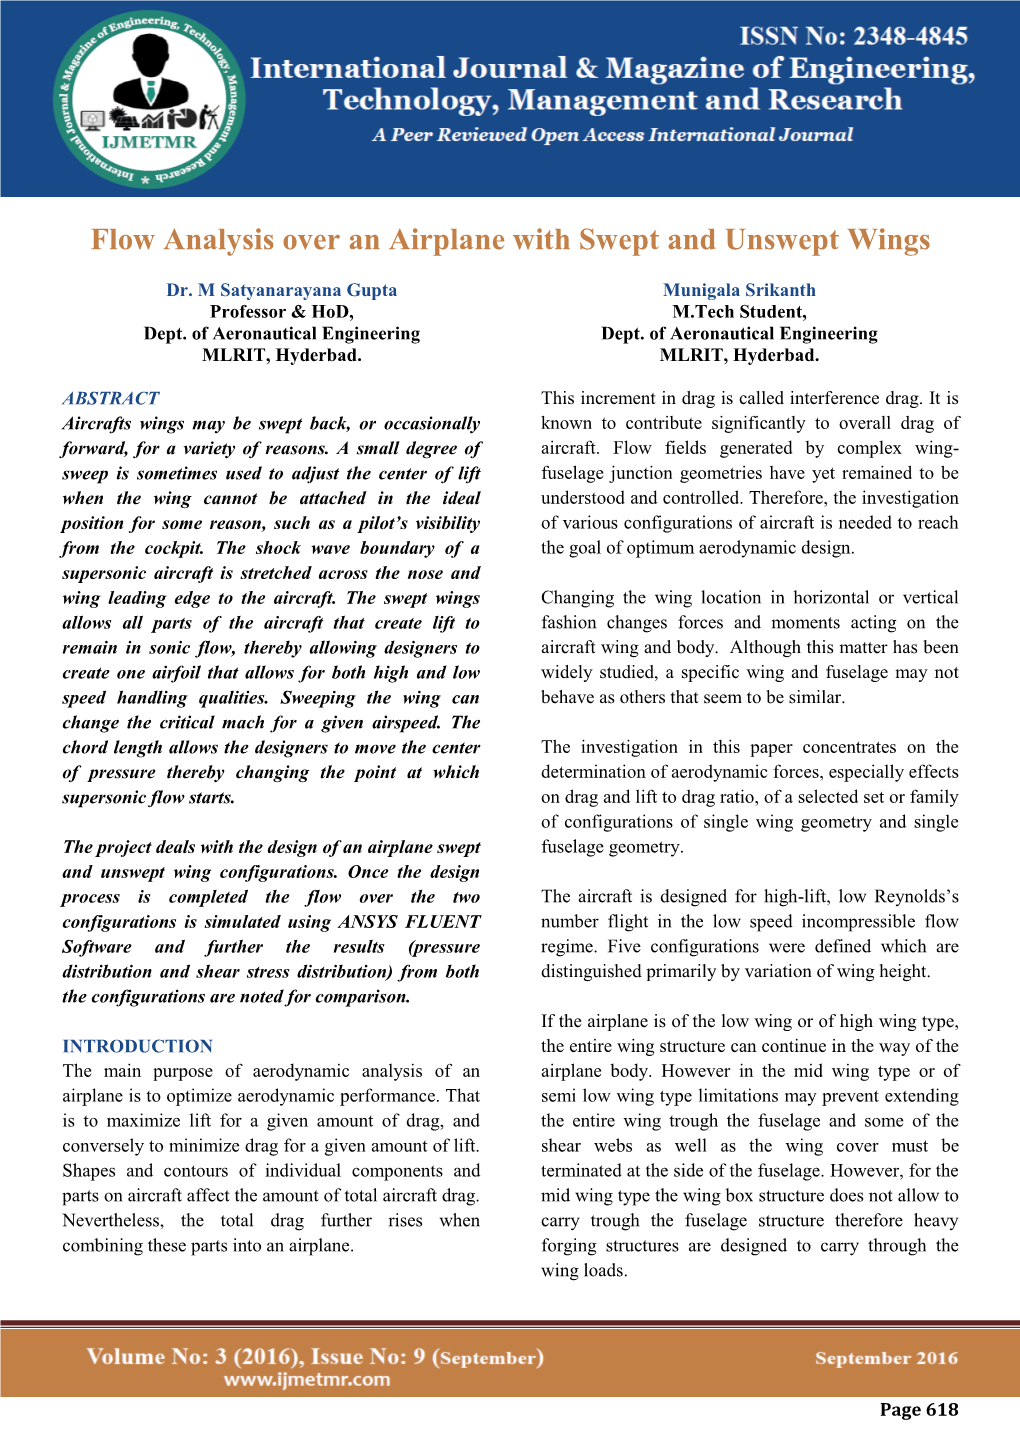 Flow Analysis Over an Airplane with Swept and Unswept Wings